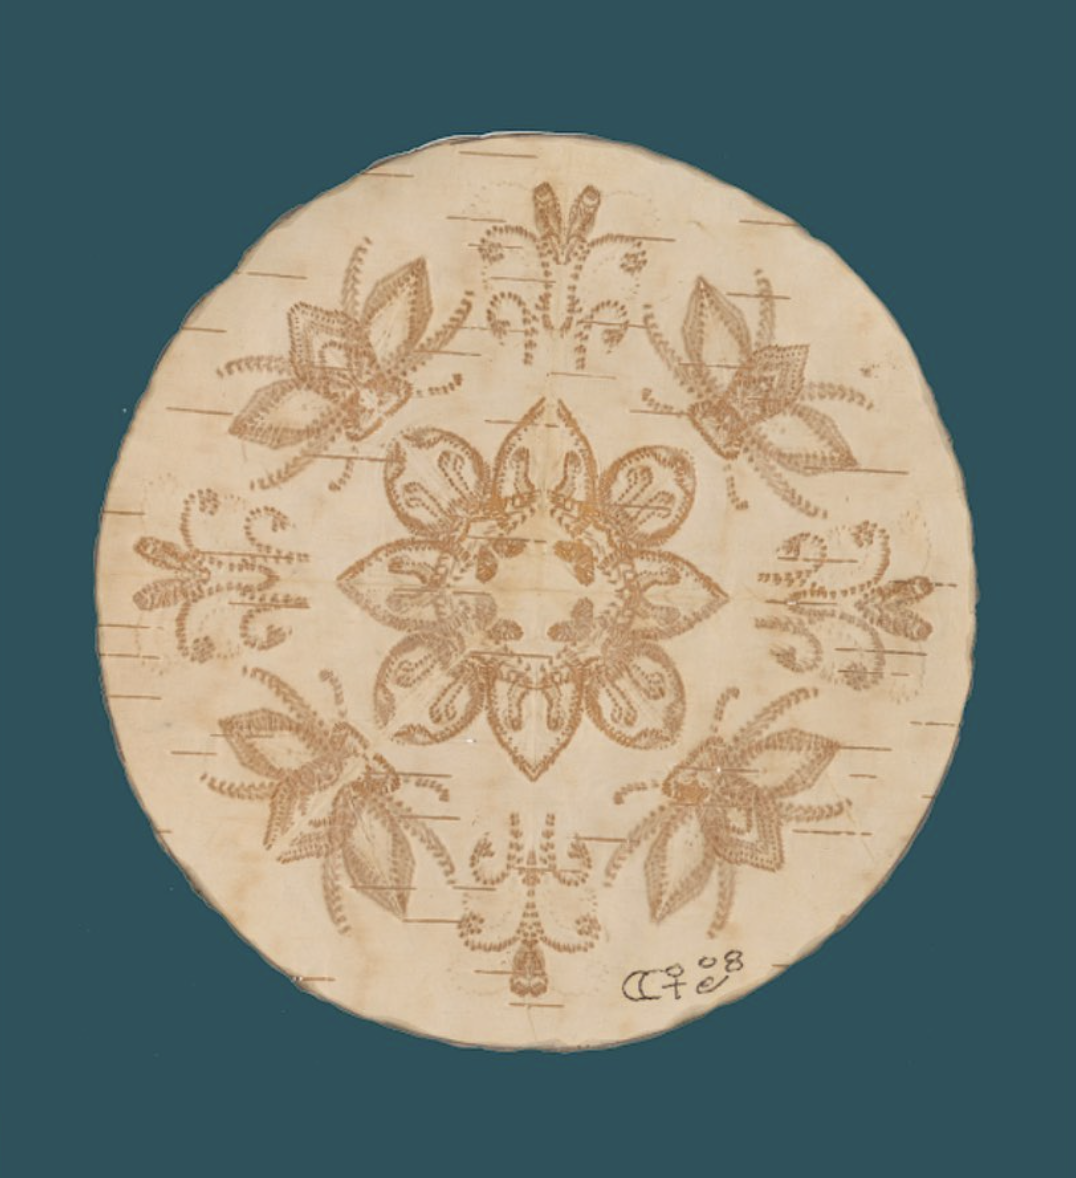 A handcrafted wooden piece of art in a circular form.